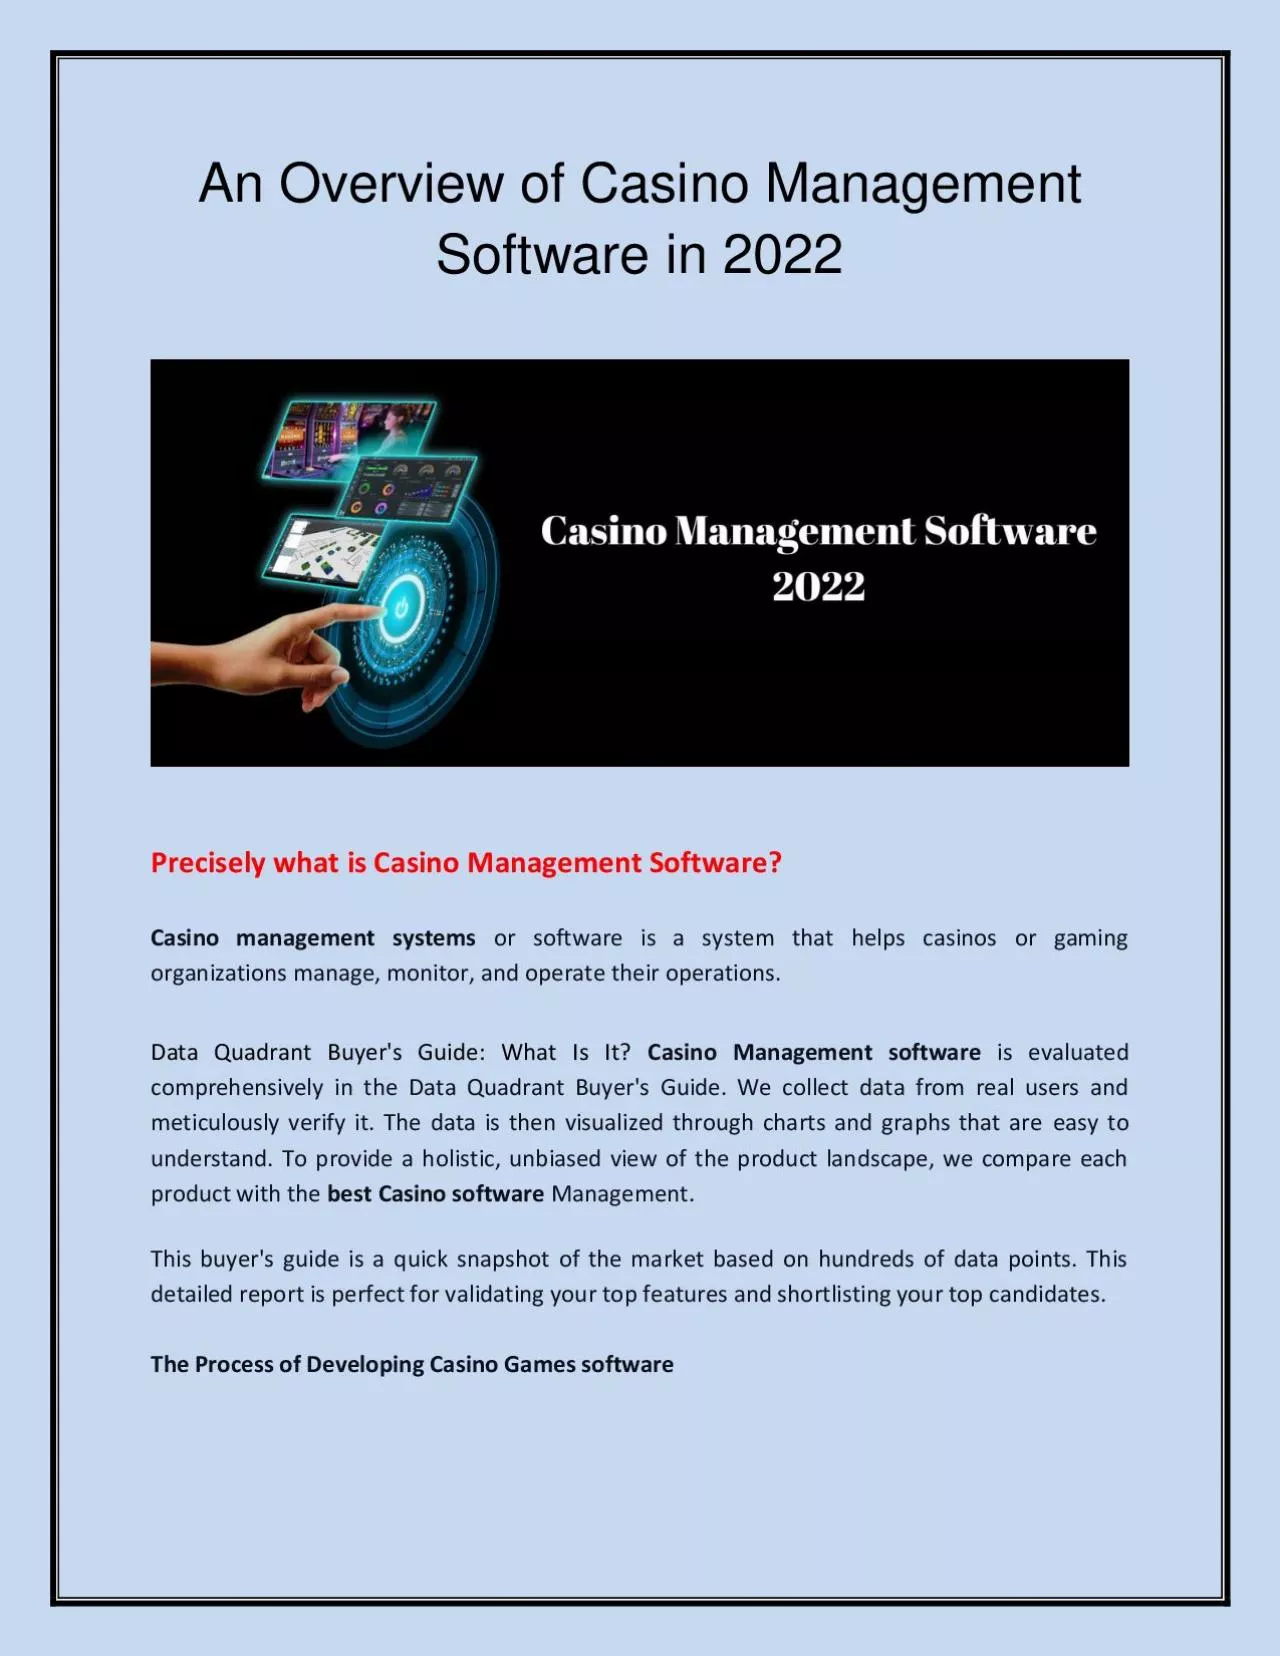 Casino Management Software in 2022